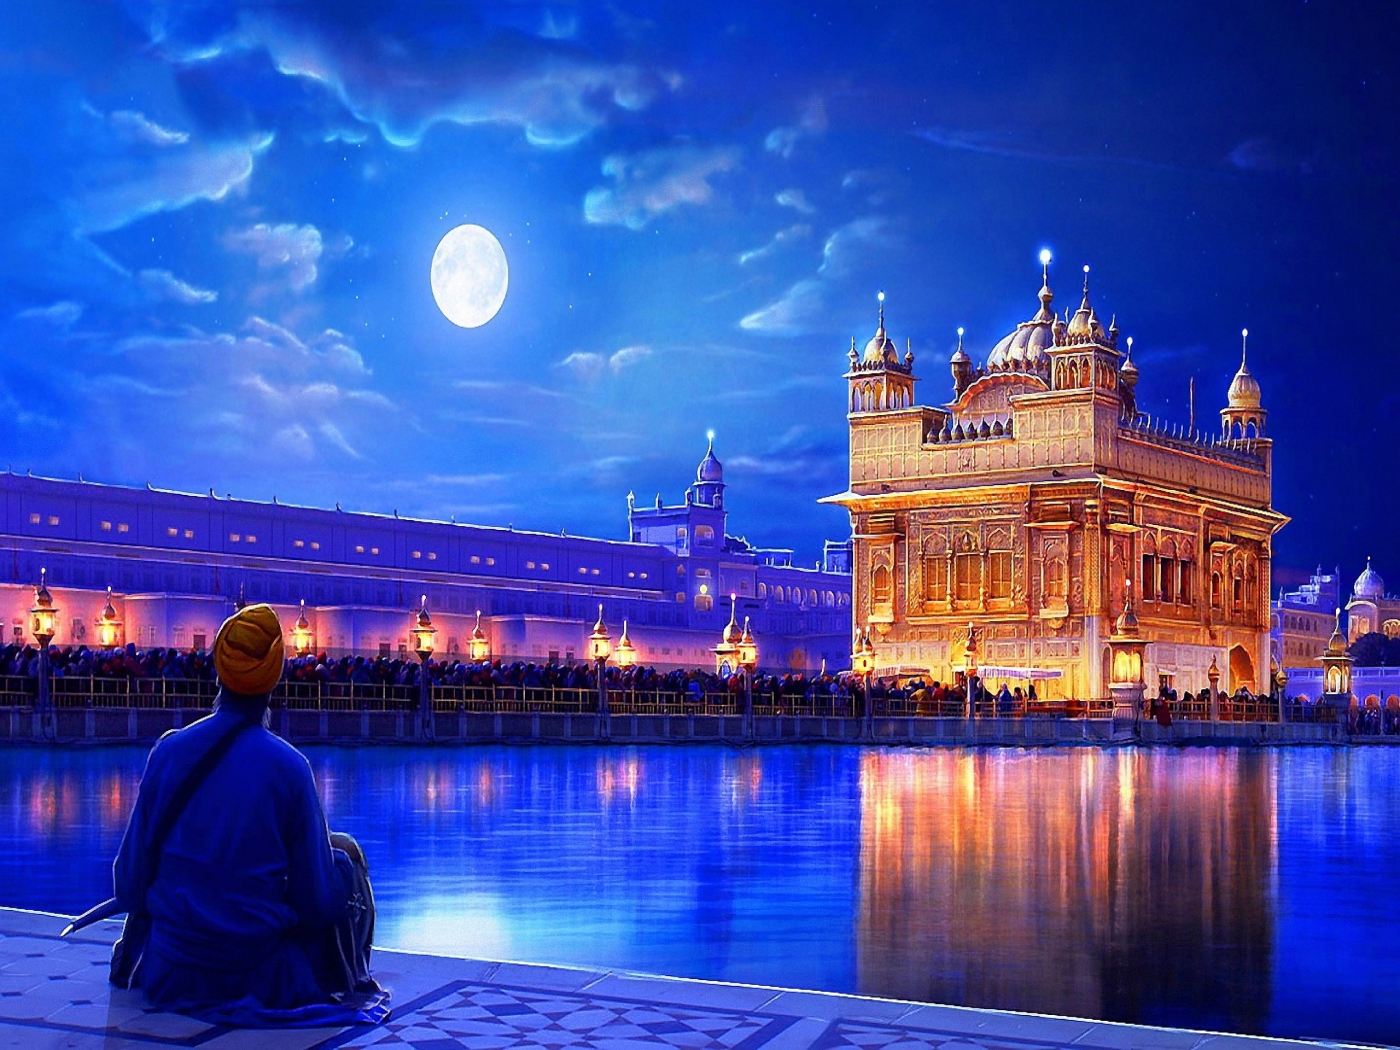 Golden Temple Amritsar India for 1400 x 1050 resolution